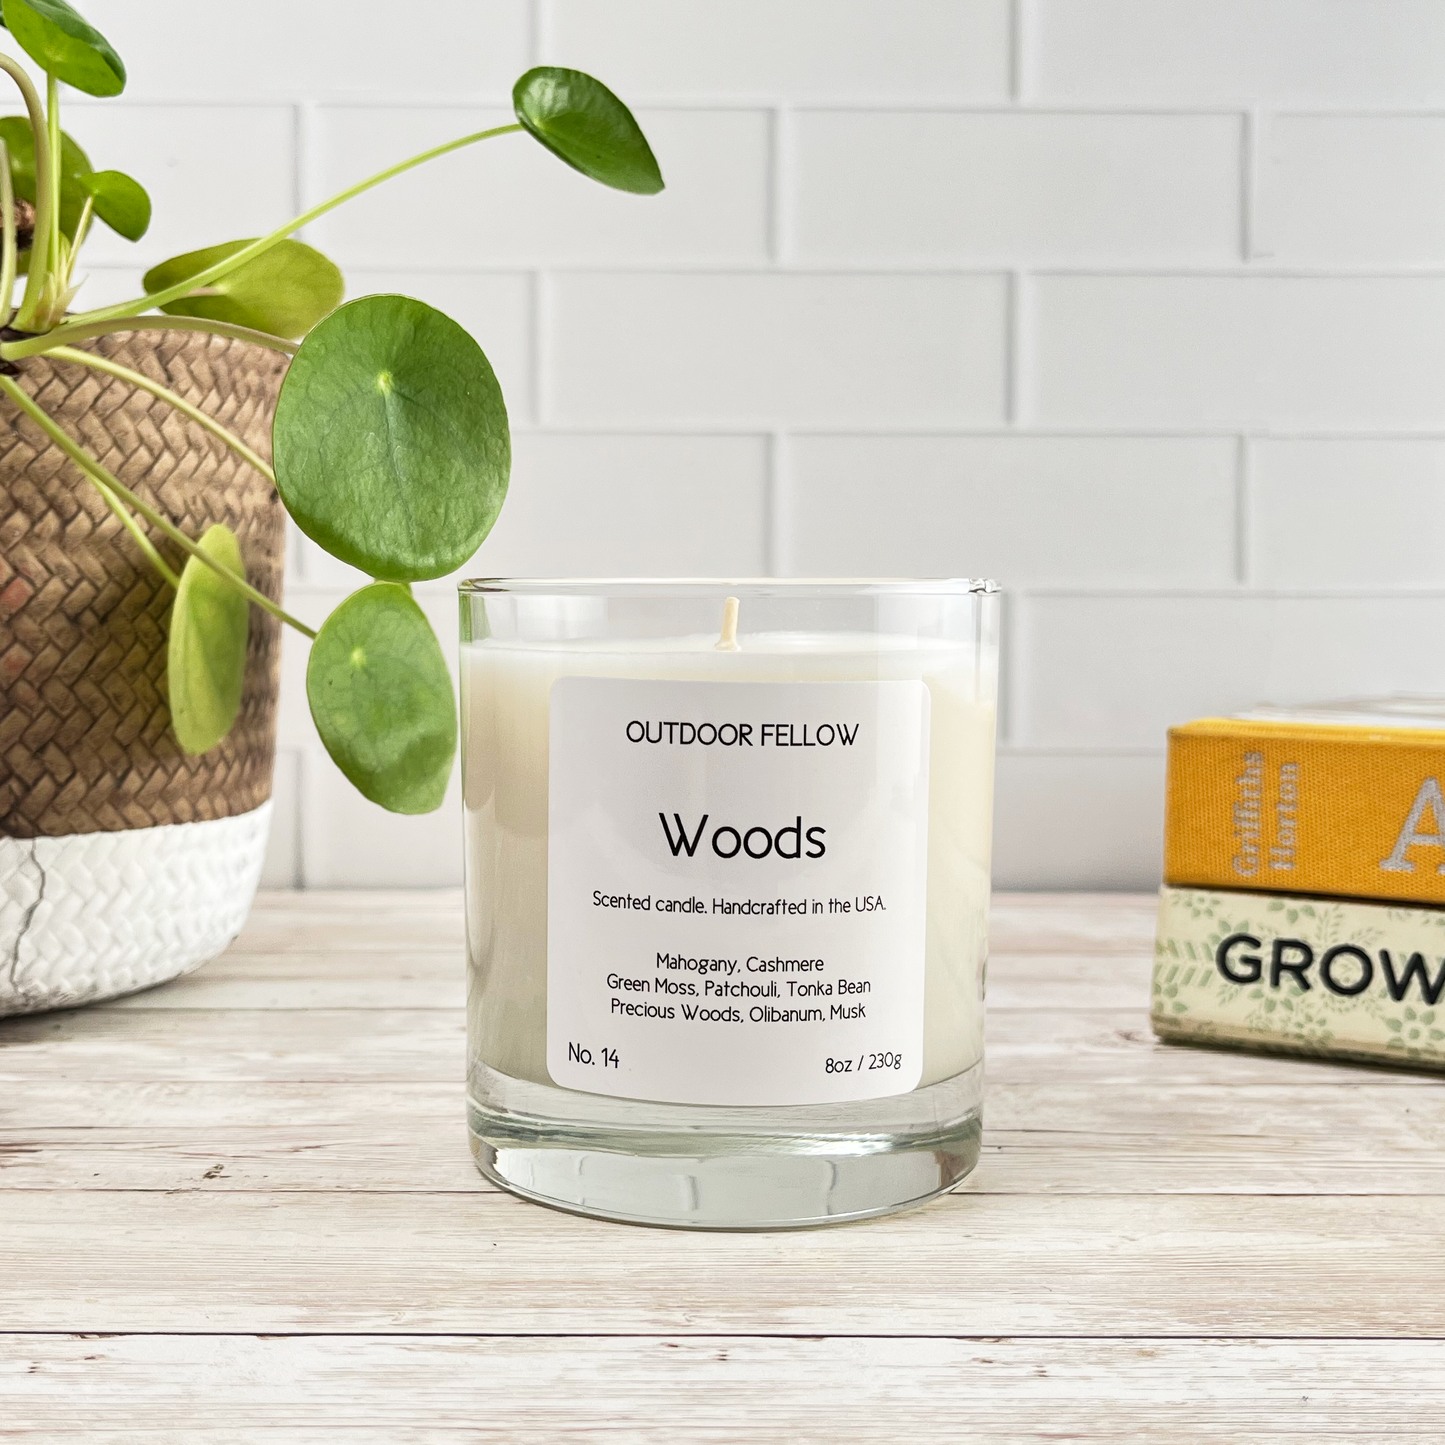 Woods scented candle on a wood surface in front of a plant and books